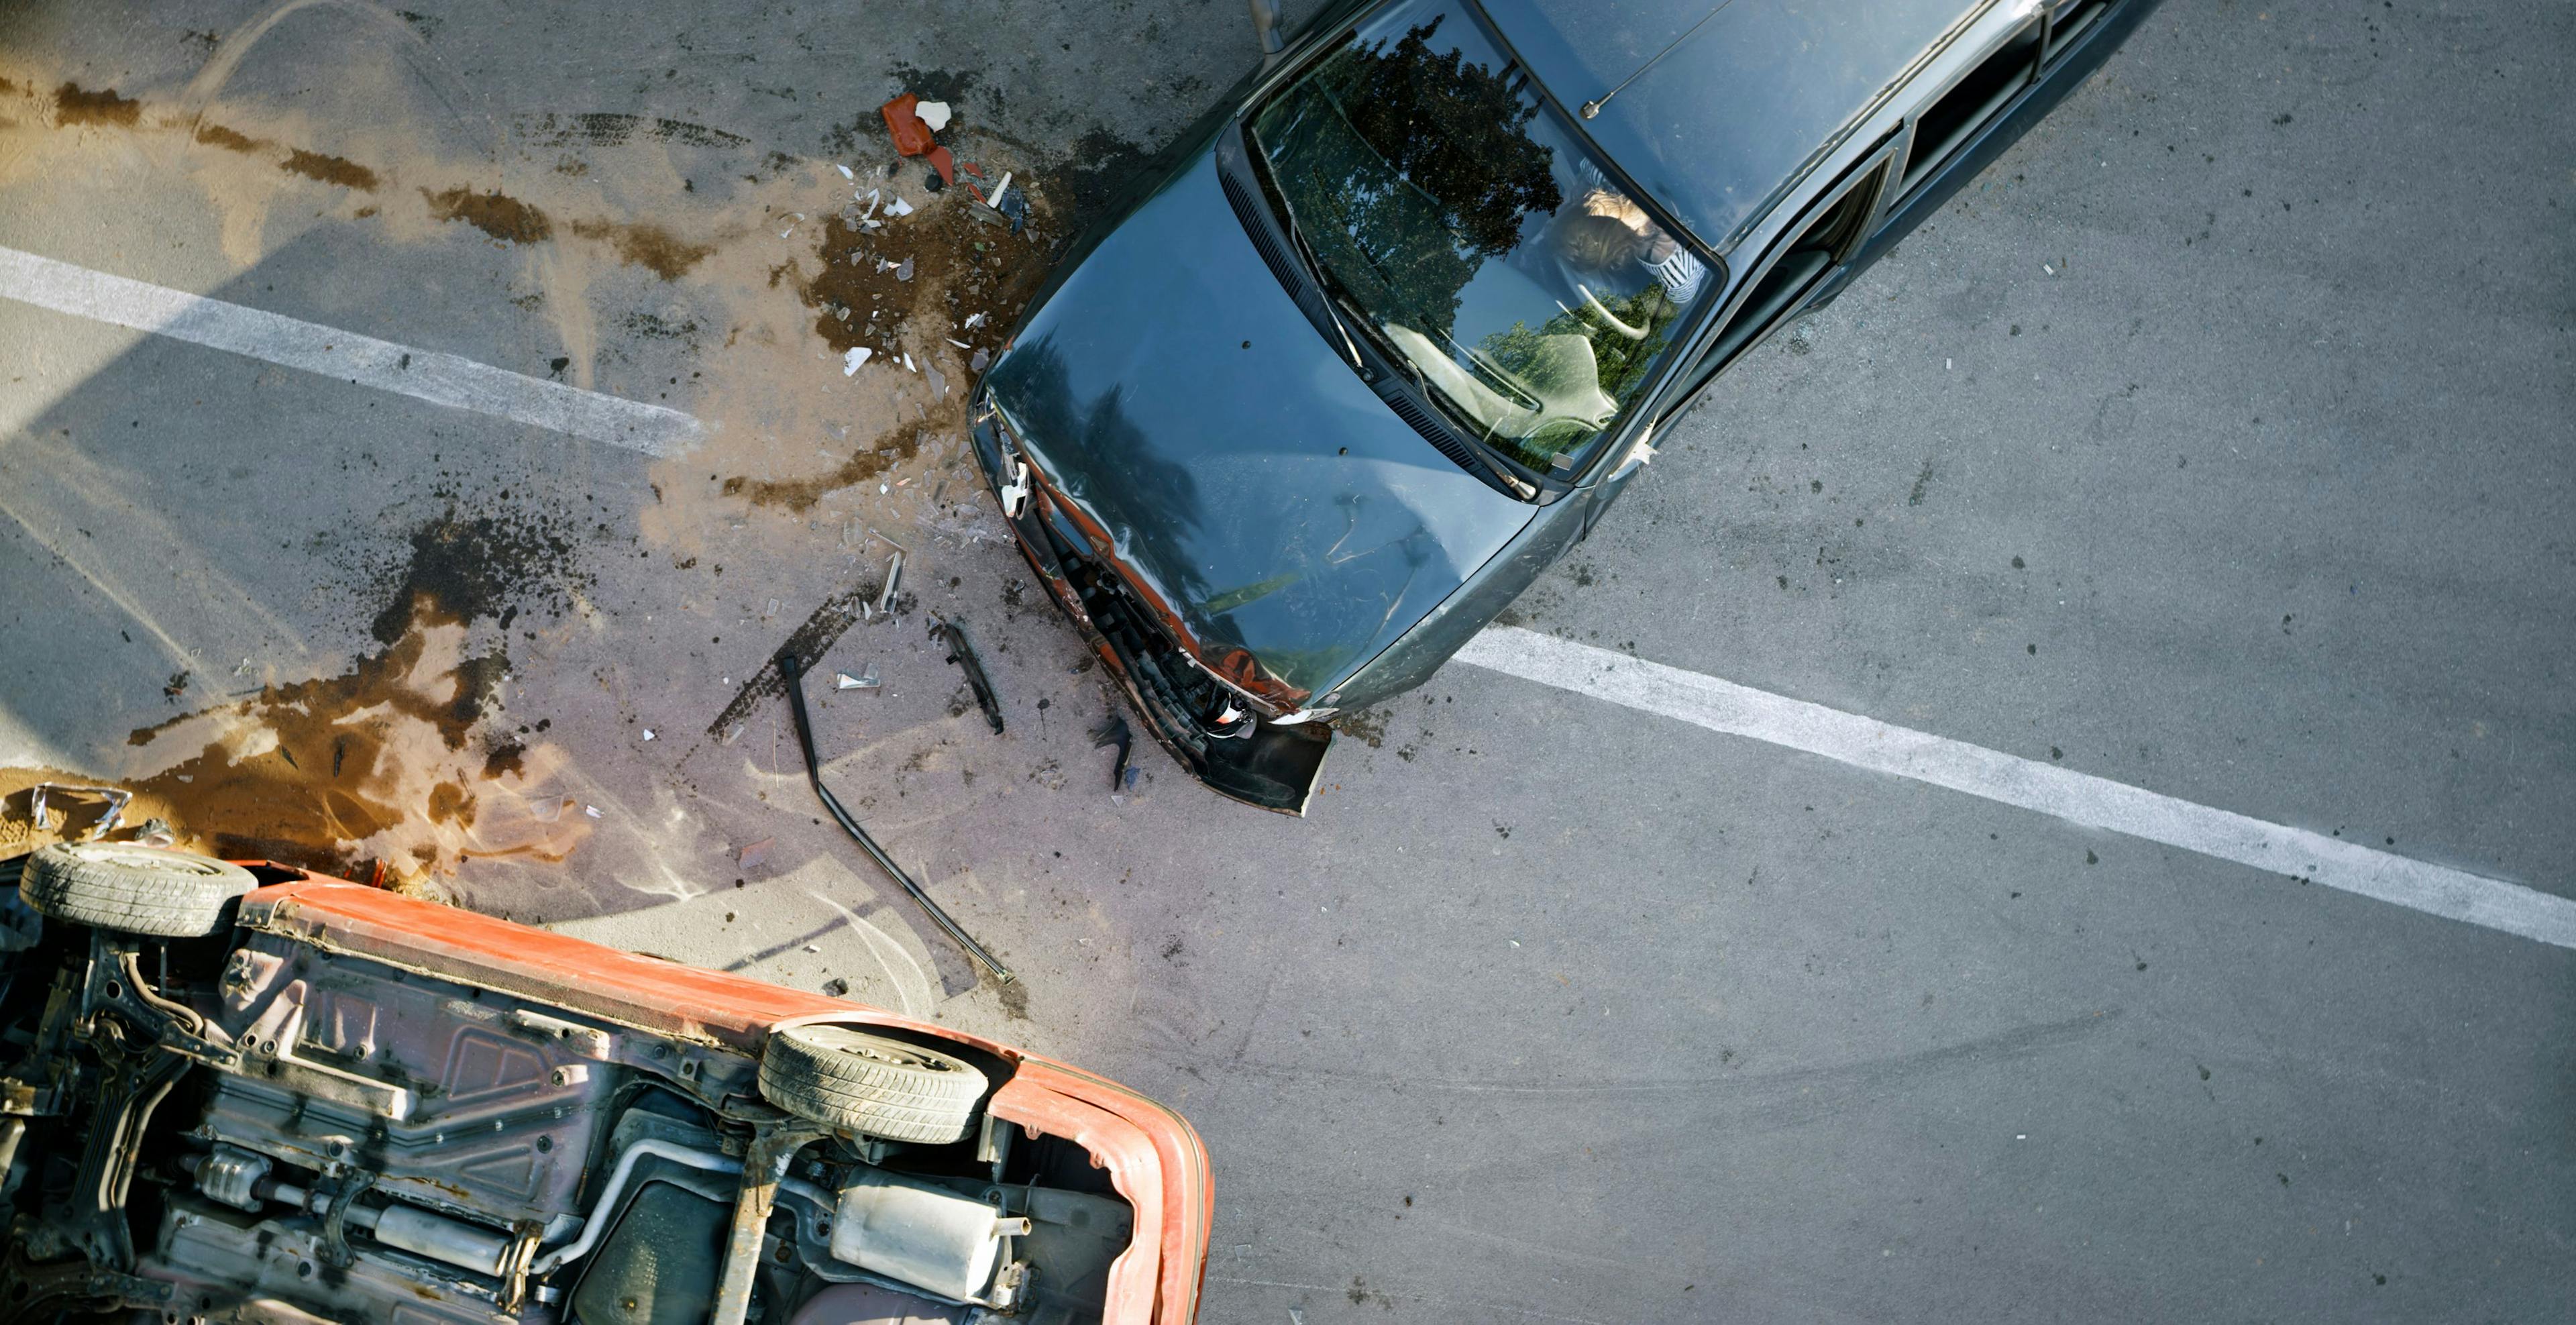 Related to Navigating Car Accident Injuries with Legal Help